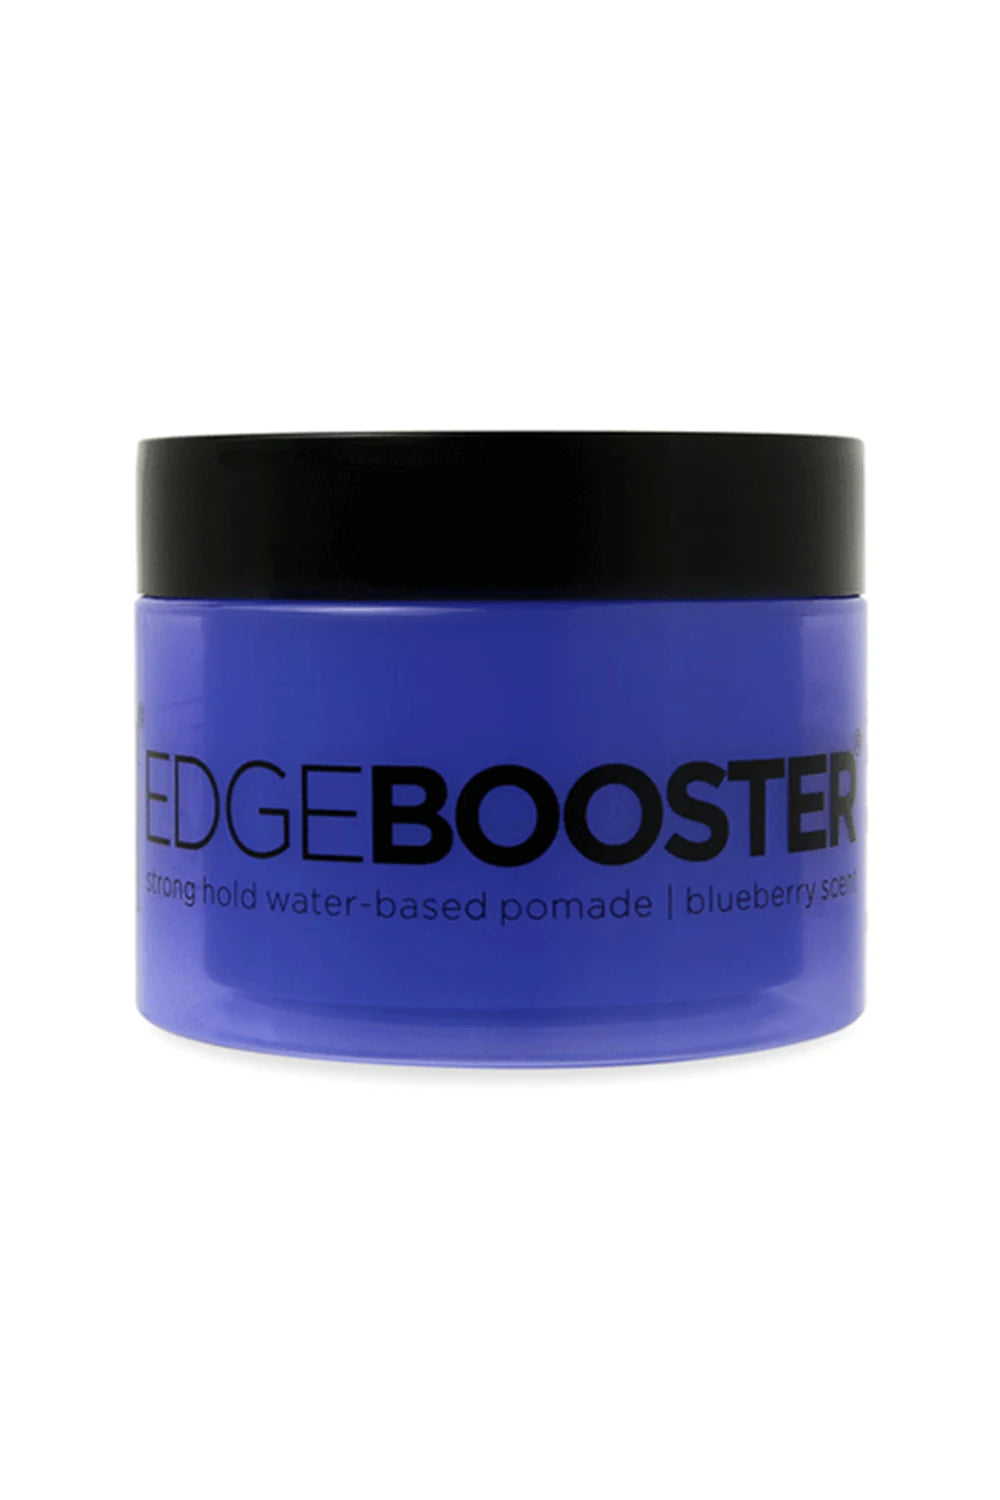 EDGE BOOSTER Strong Hold Water Based Pomade 3.38 Oz